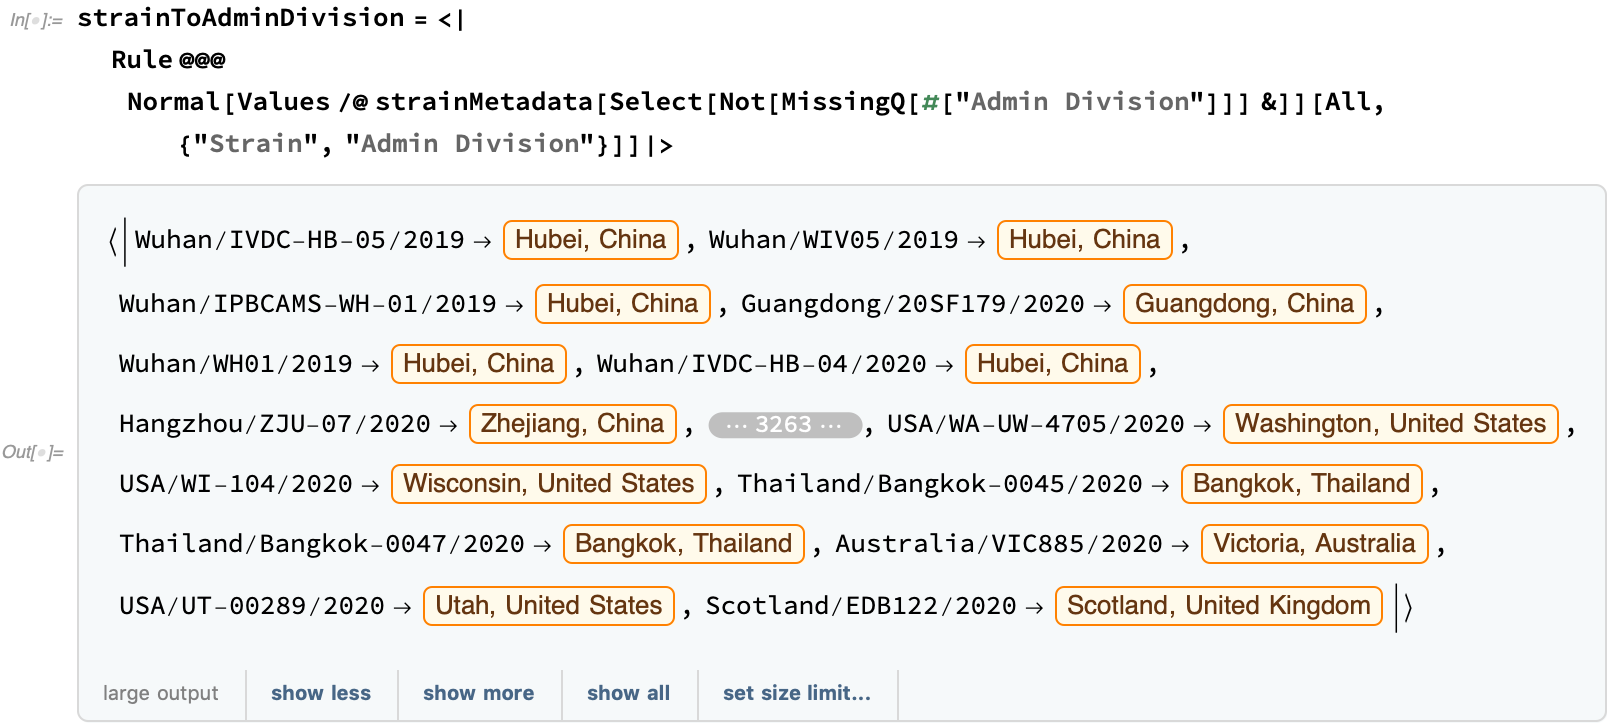 Strain to Administrative Division lookup